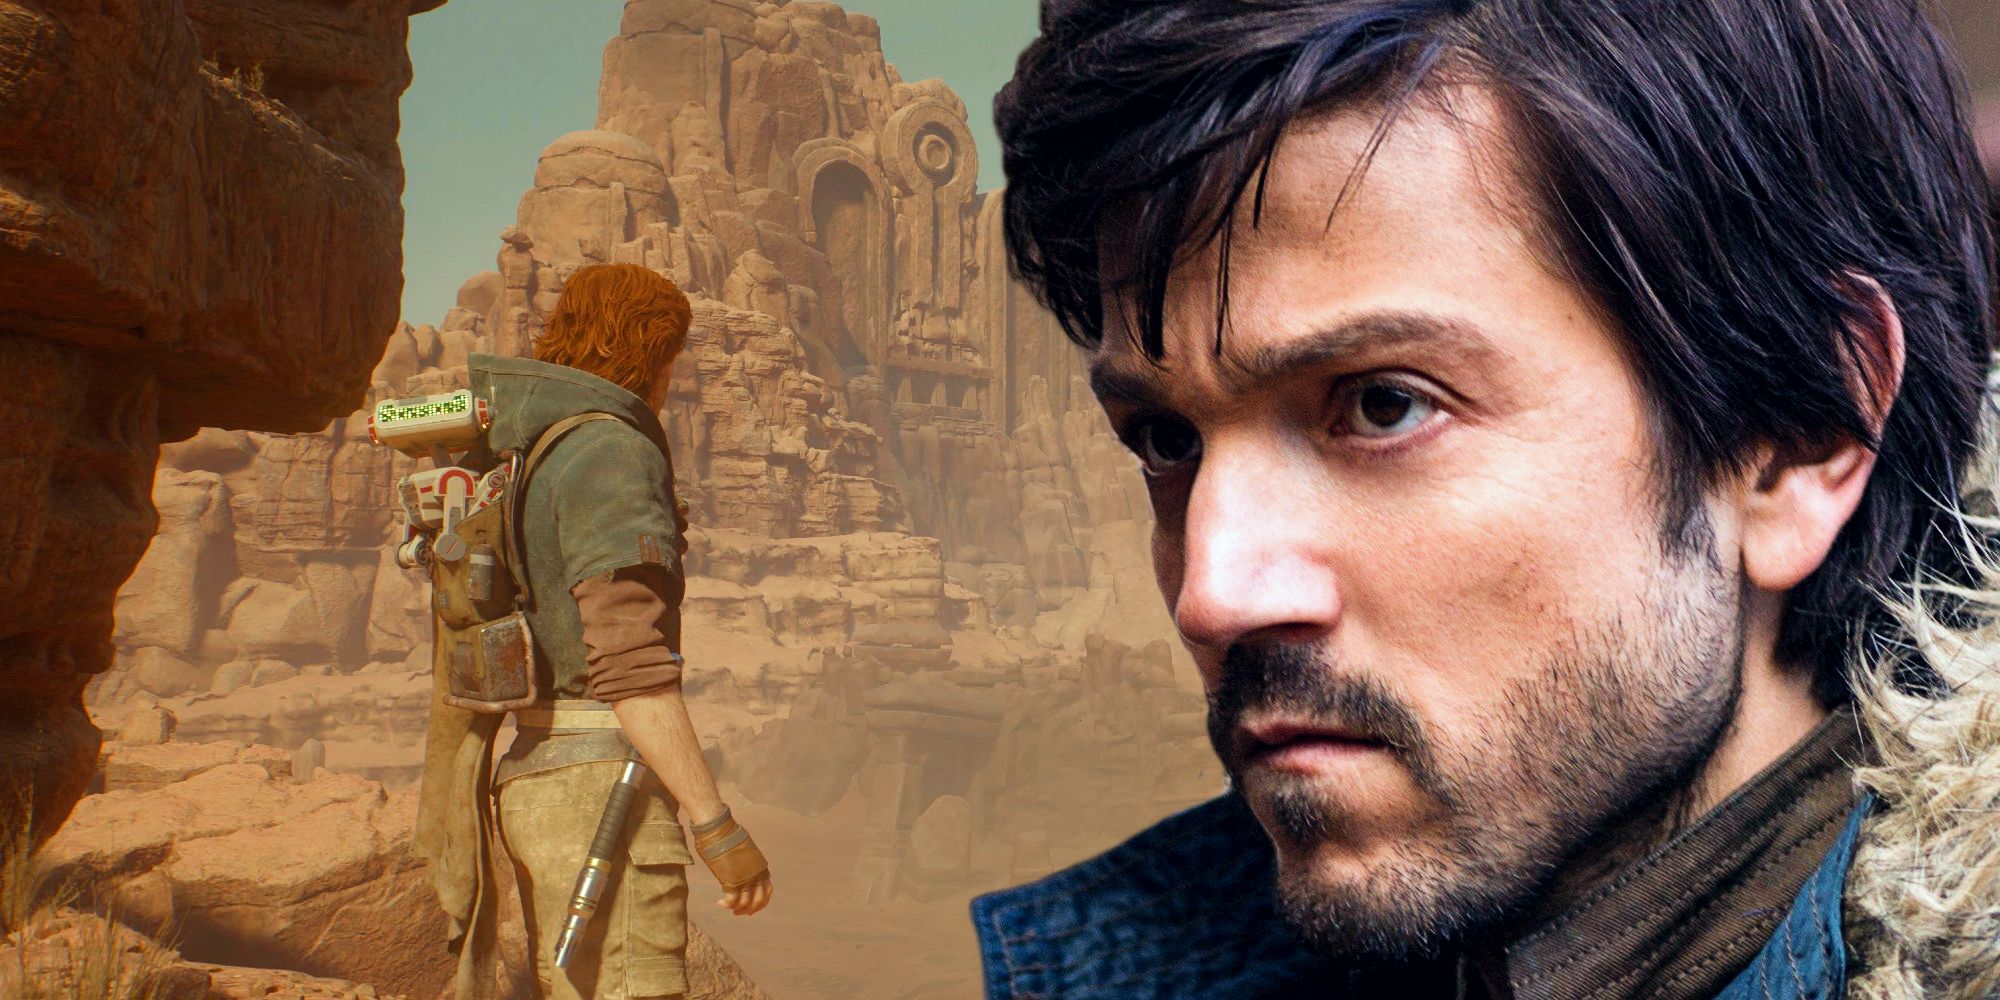 A close-up of Cassian Andor from Rogue One next to Cal standing on Jedha in Star Wars Jedi: Survivor.